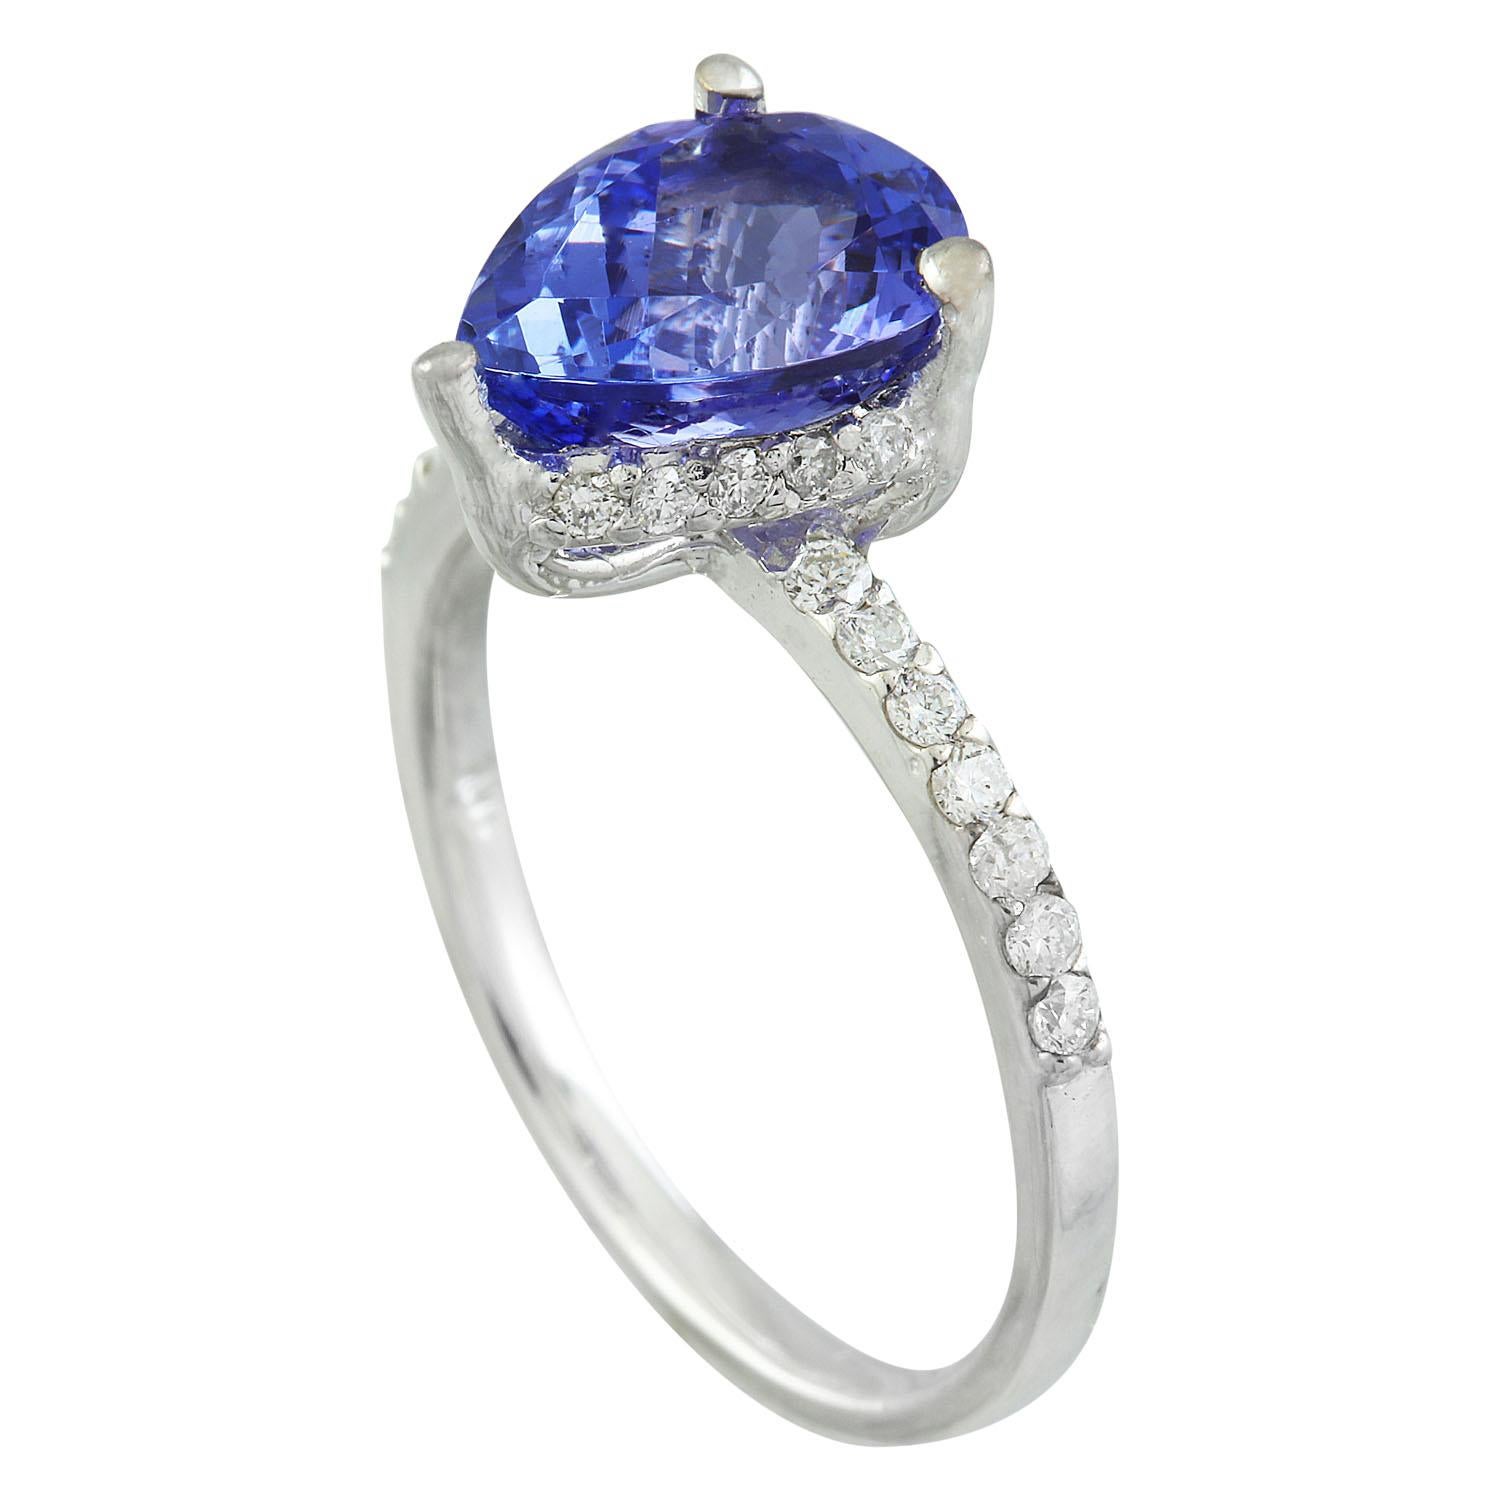 2.95 Carat Natural Tanzanite 14 Karat Solid White Gold Diamond Ring
Stamped: 14K 
Total Ring Weight: 3.2 Grams 
Tanzanite Weight 2.65 Carat (10.00x8.00 Millimeters)
Diamond Weight: 0.30 carat (F-G Color, VS2-SI1 Clarity)
Face Measures: 10.20x7.80